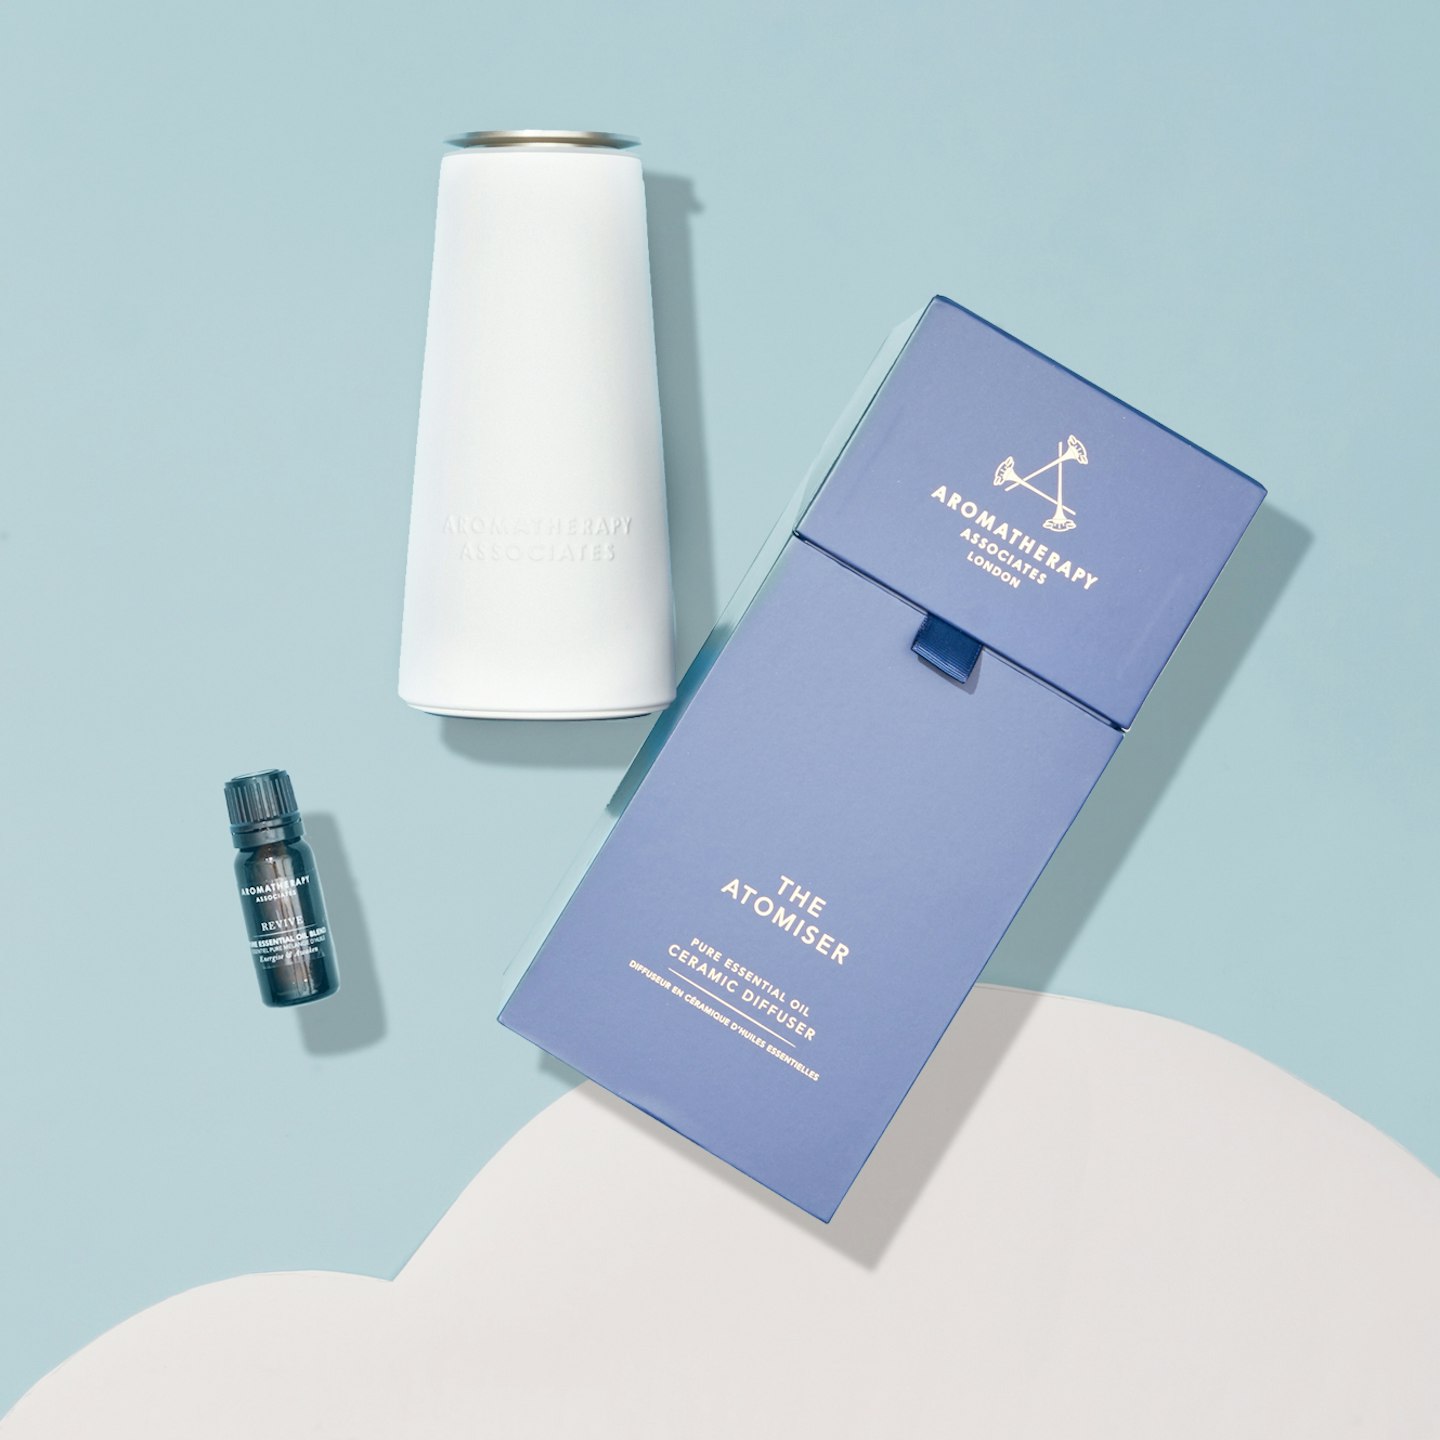 mum to be gifts The Atomiser, £84, Aromatherapy Associates